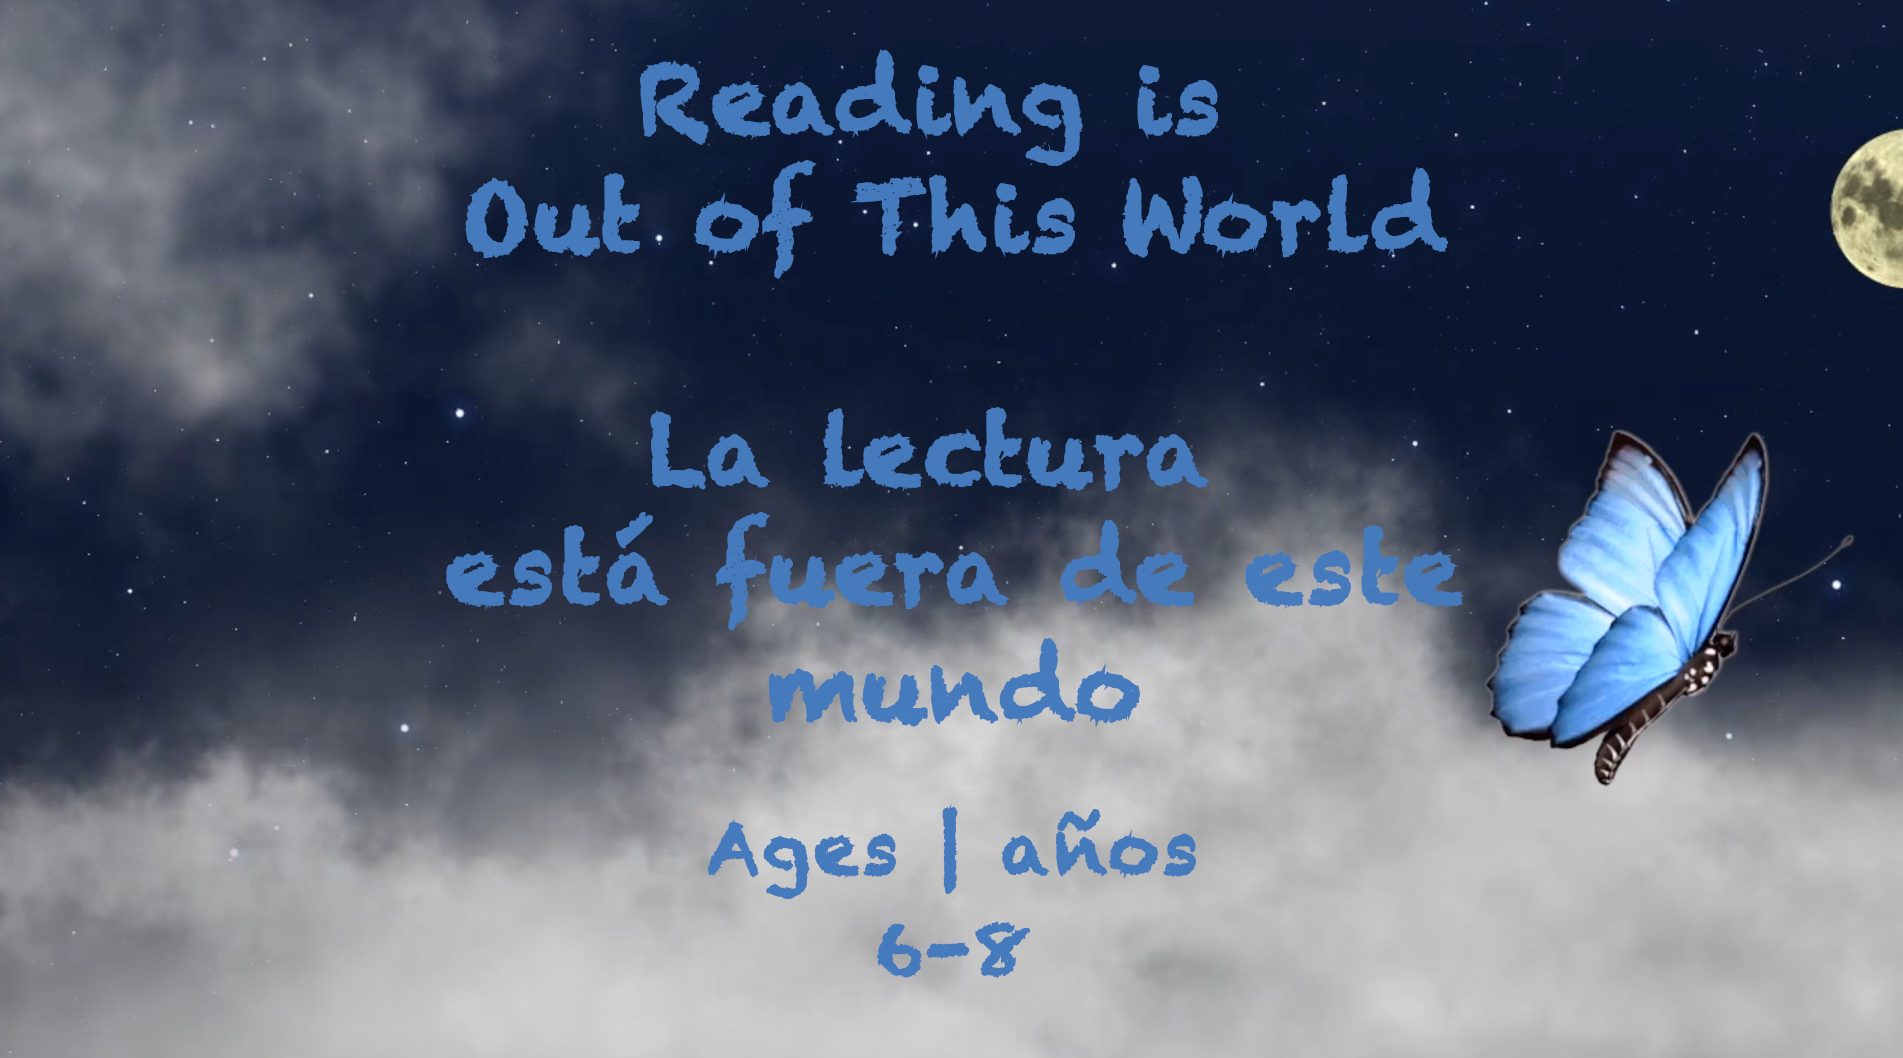 Reading is Out of This World for 6-8 year olds